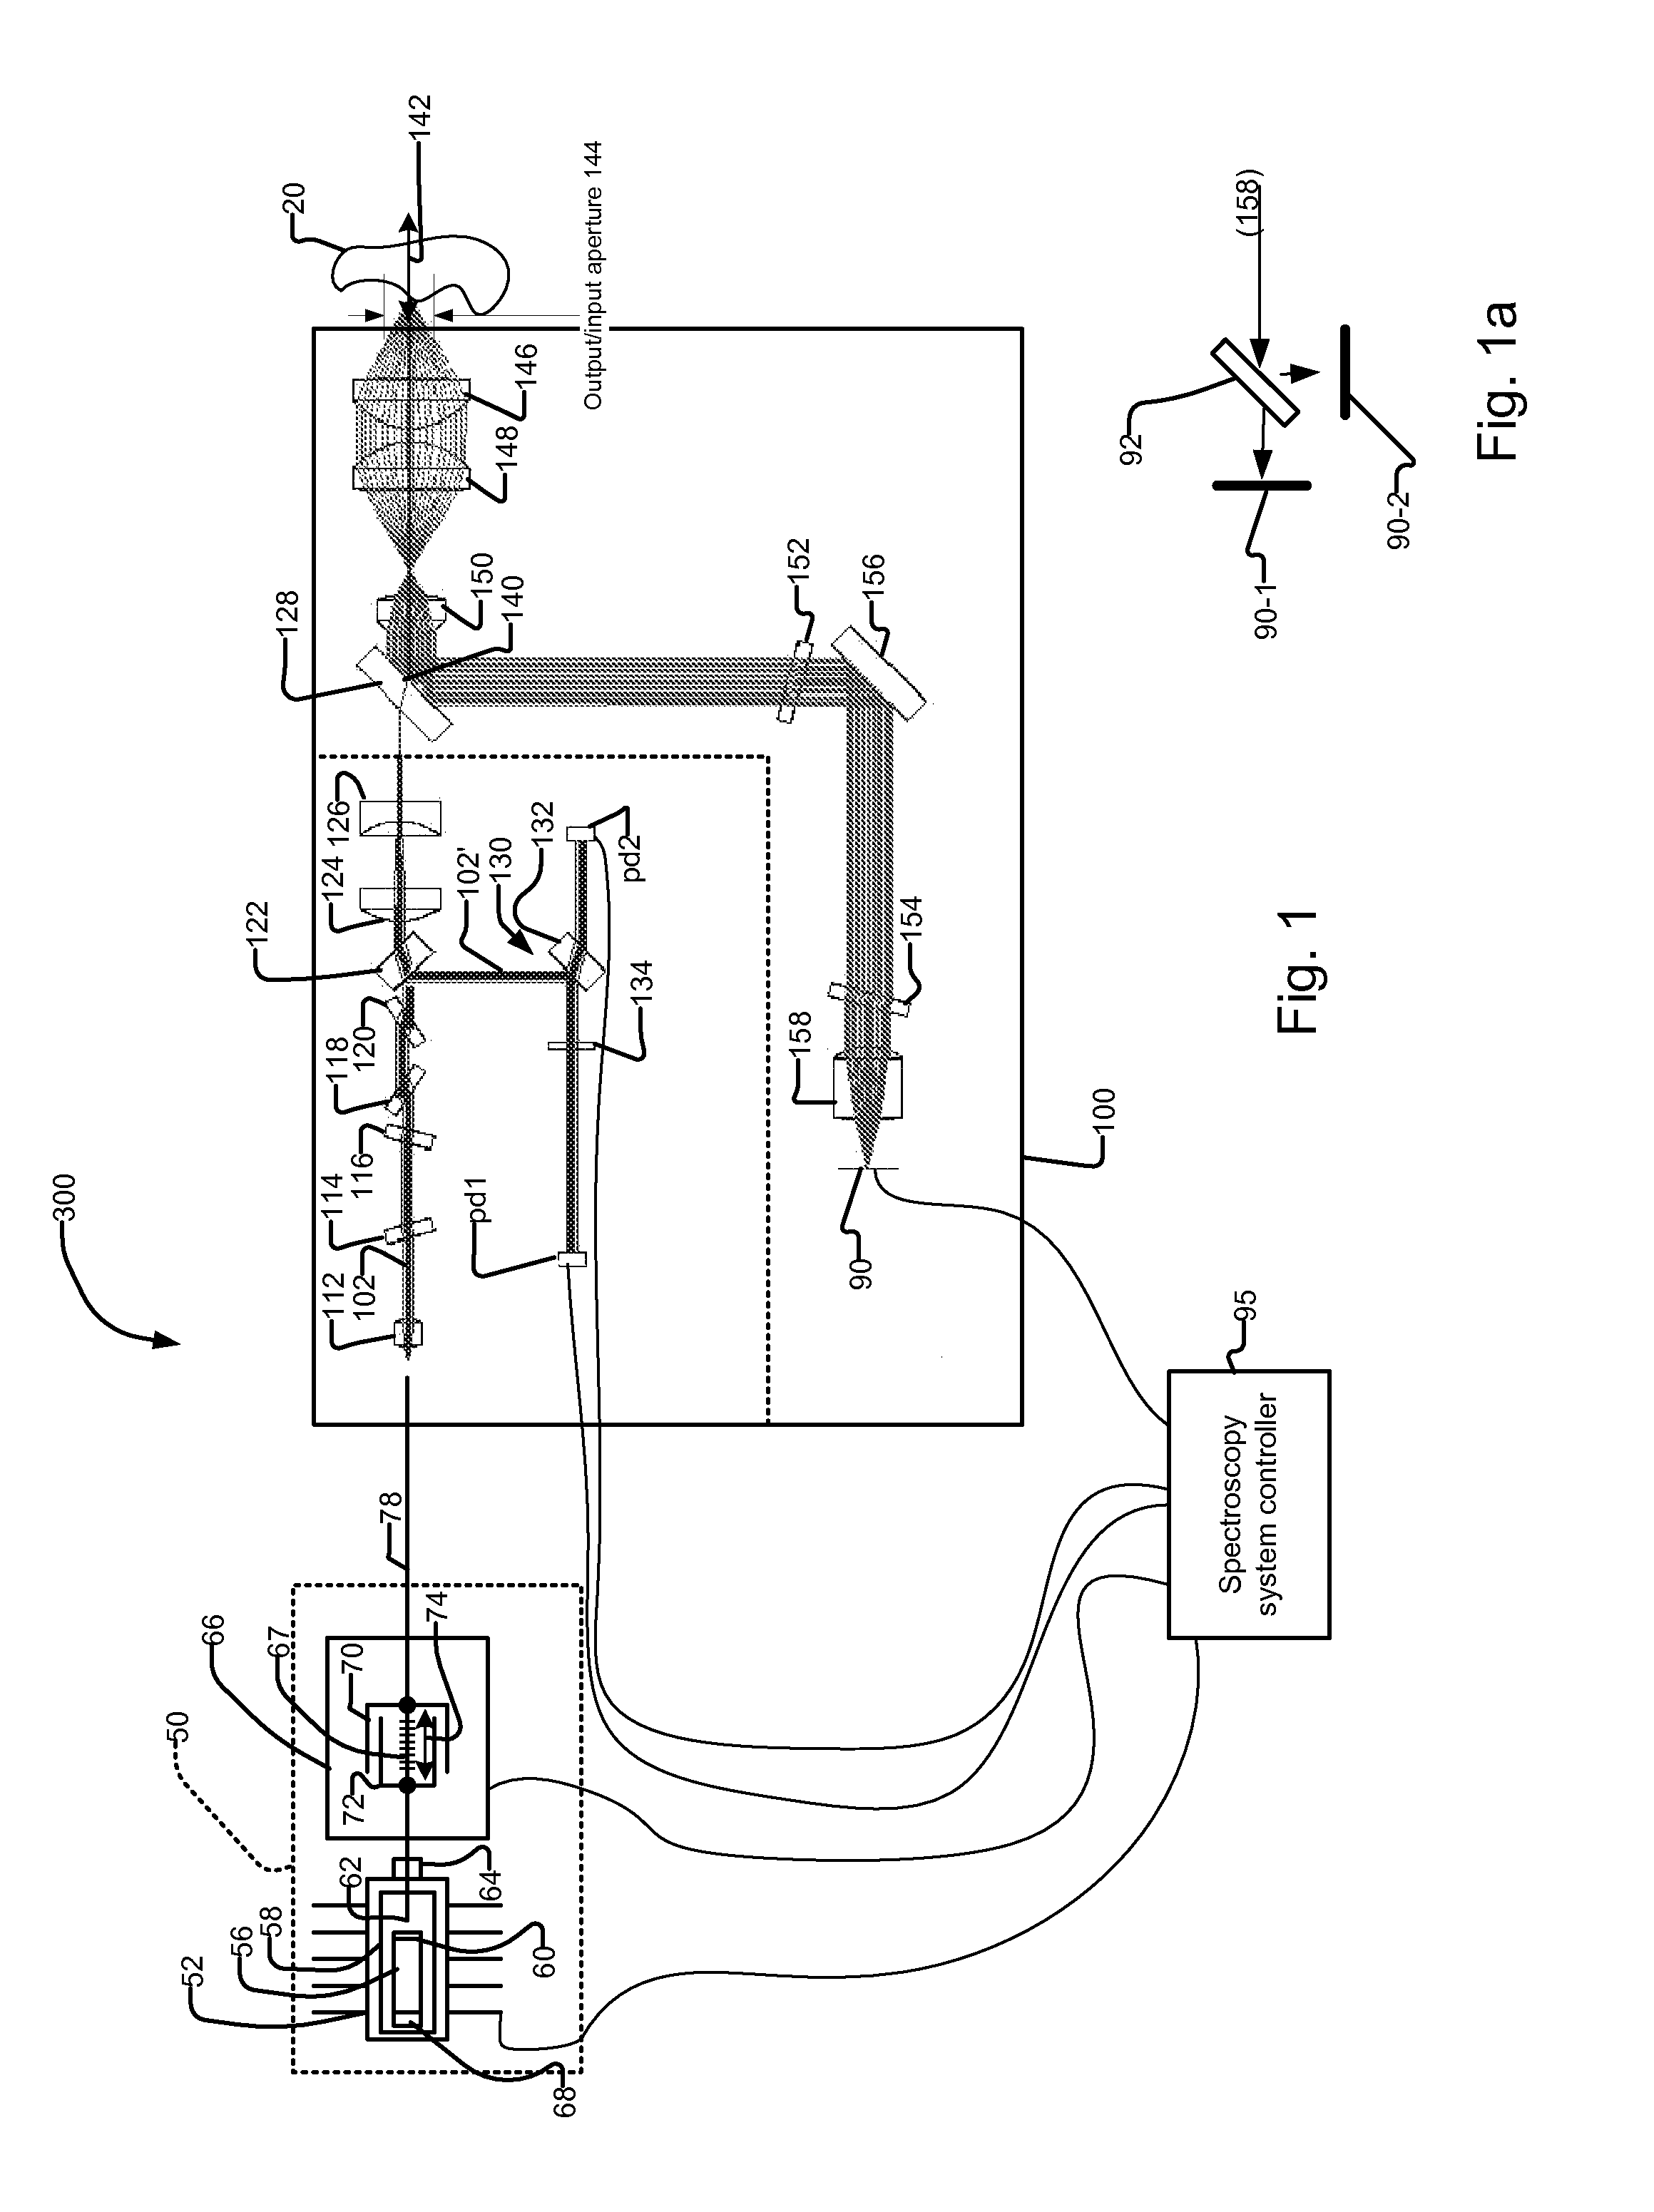 Low pixel count tunable laser raman spectroscopy system and method